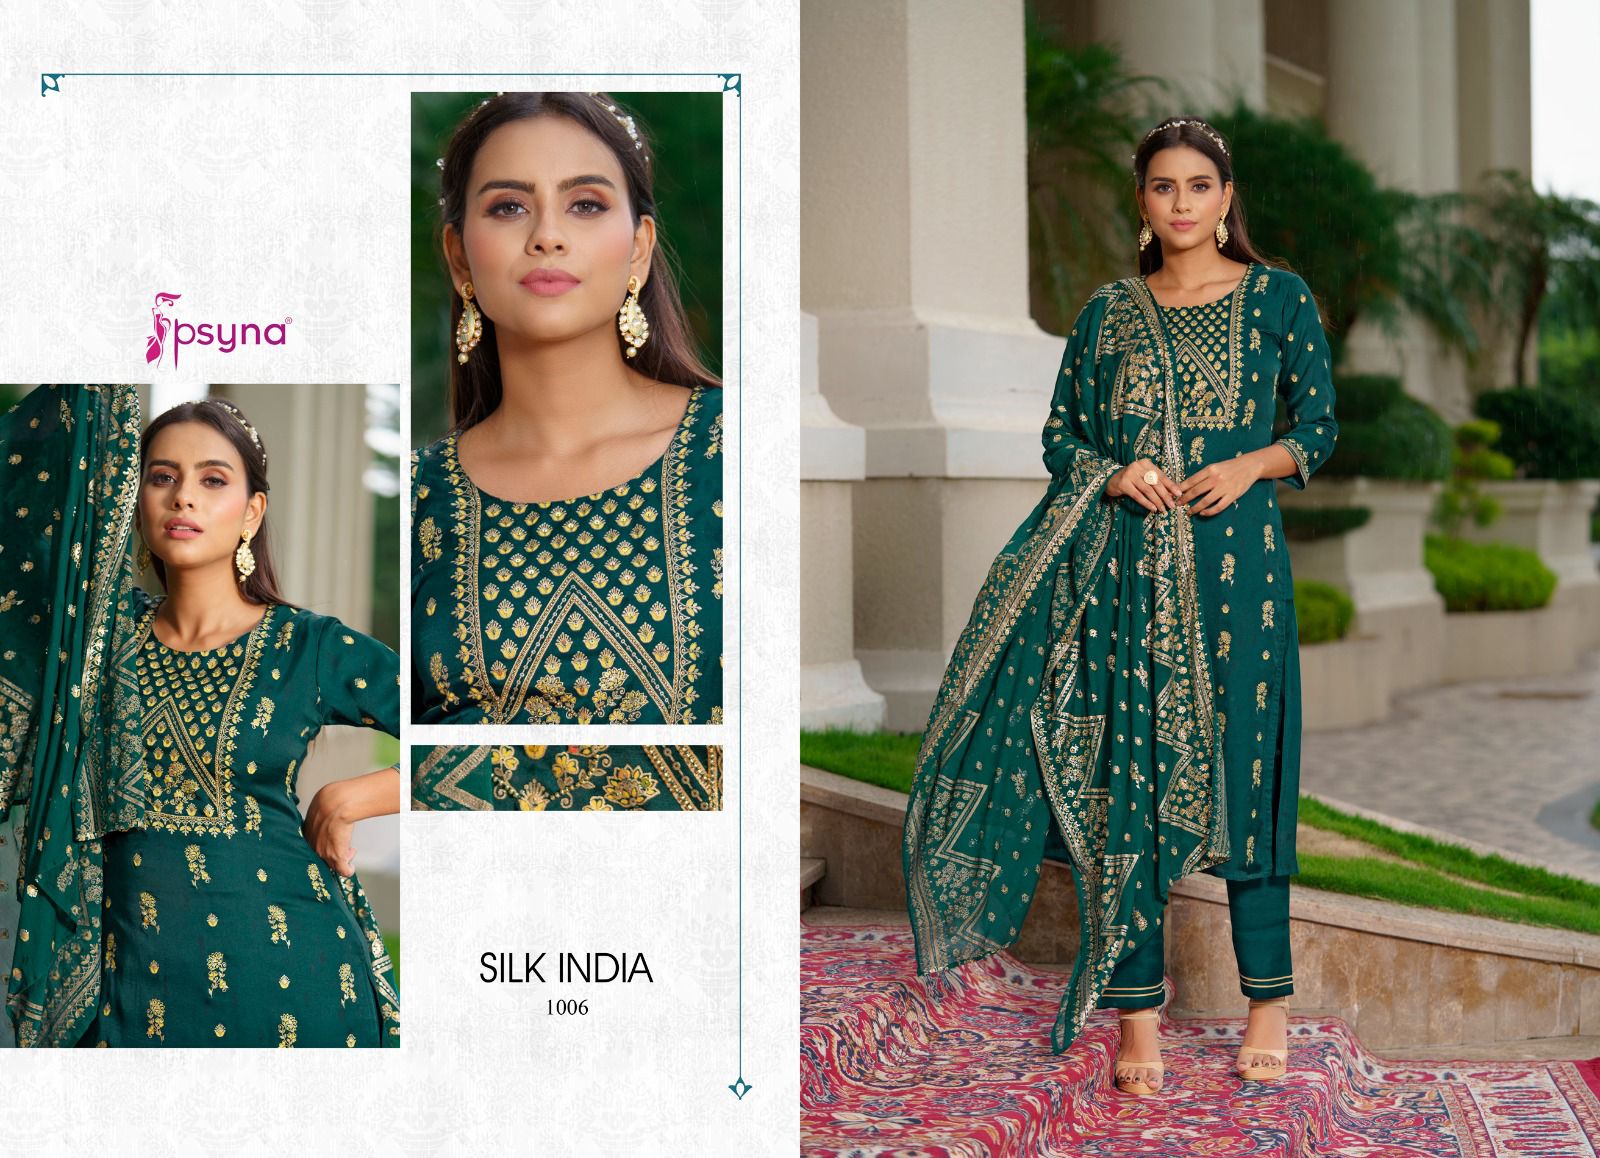 Psyna Silk India collection 1